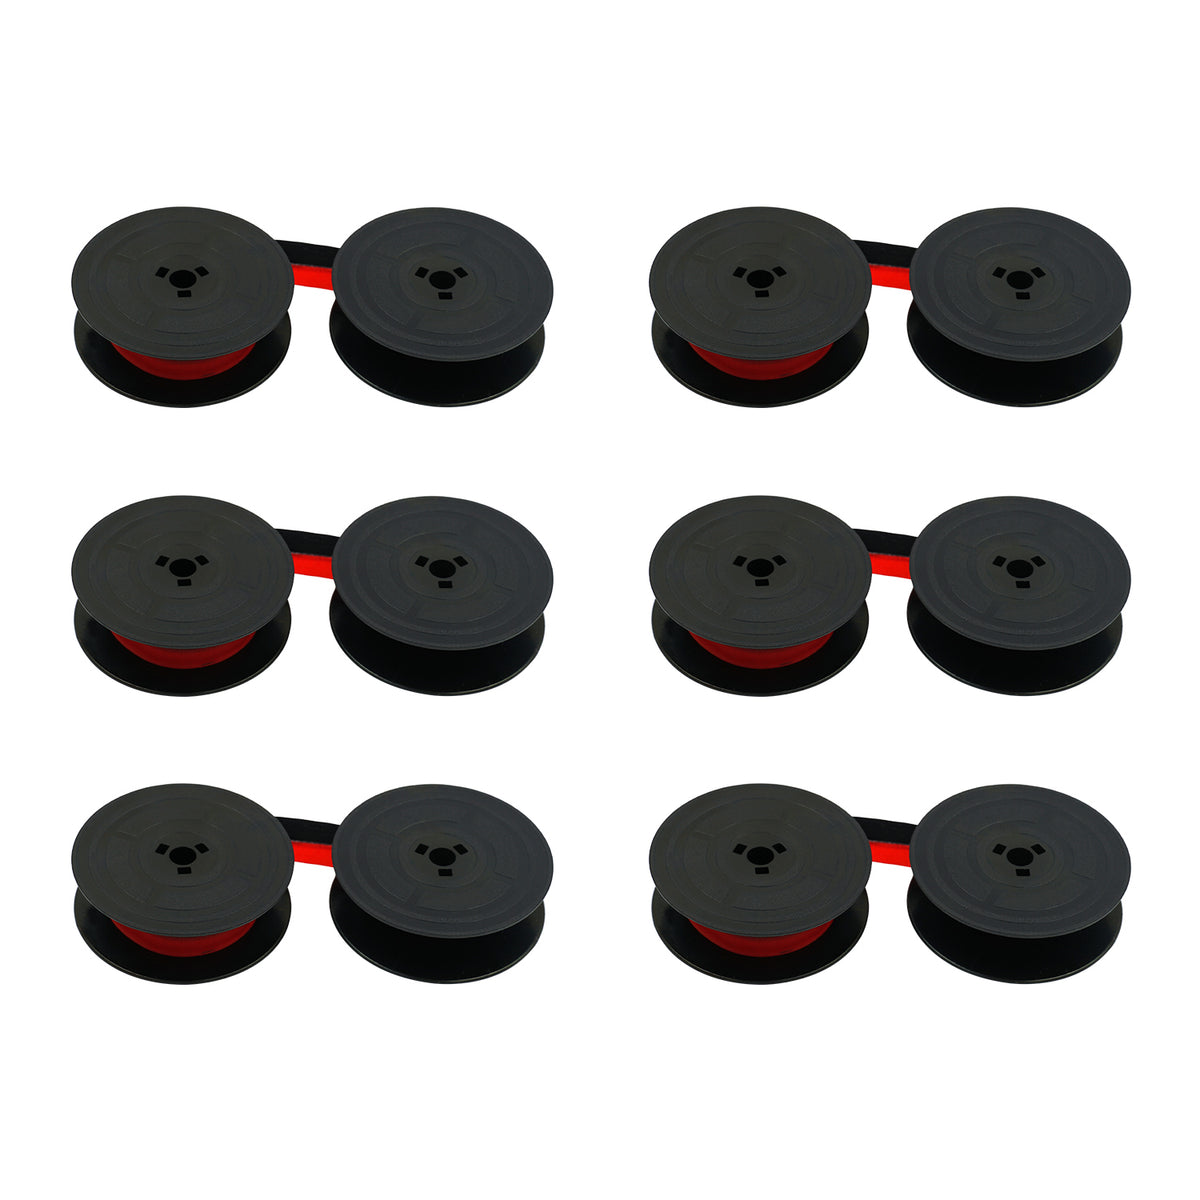 OLYMPIA BLACK RED TYPEWRITER RIBBON TWIN SPOOL Group 1 FITS MANY MODELS By SMCO 